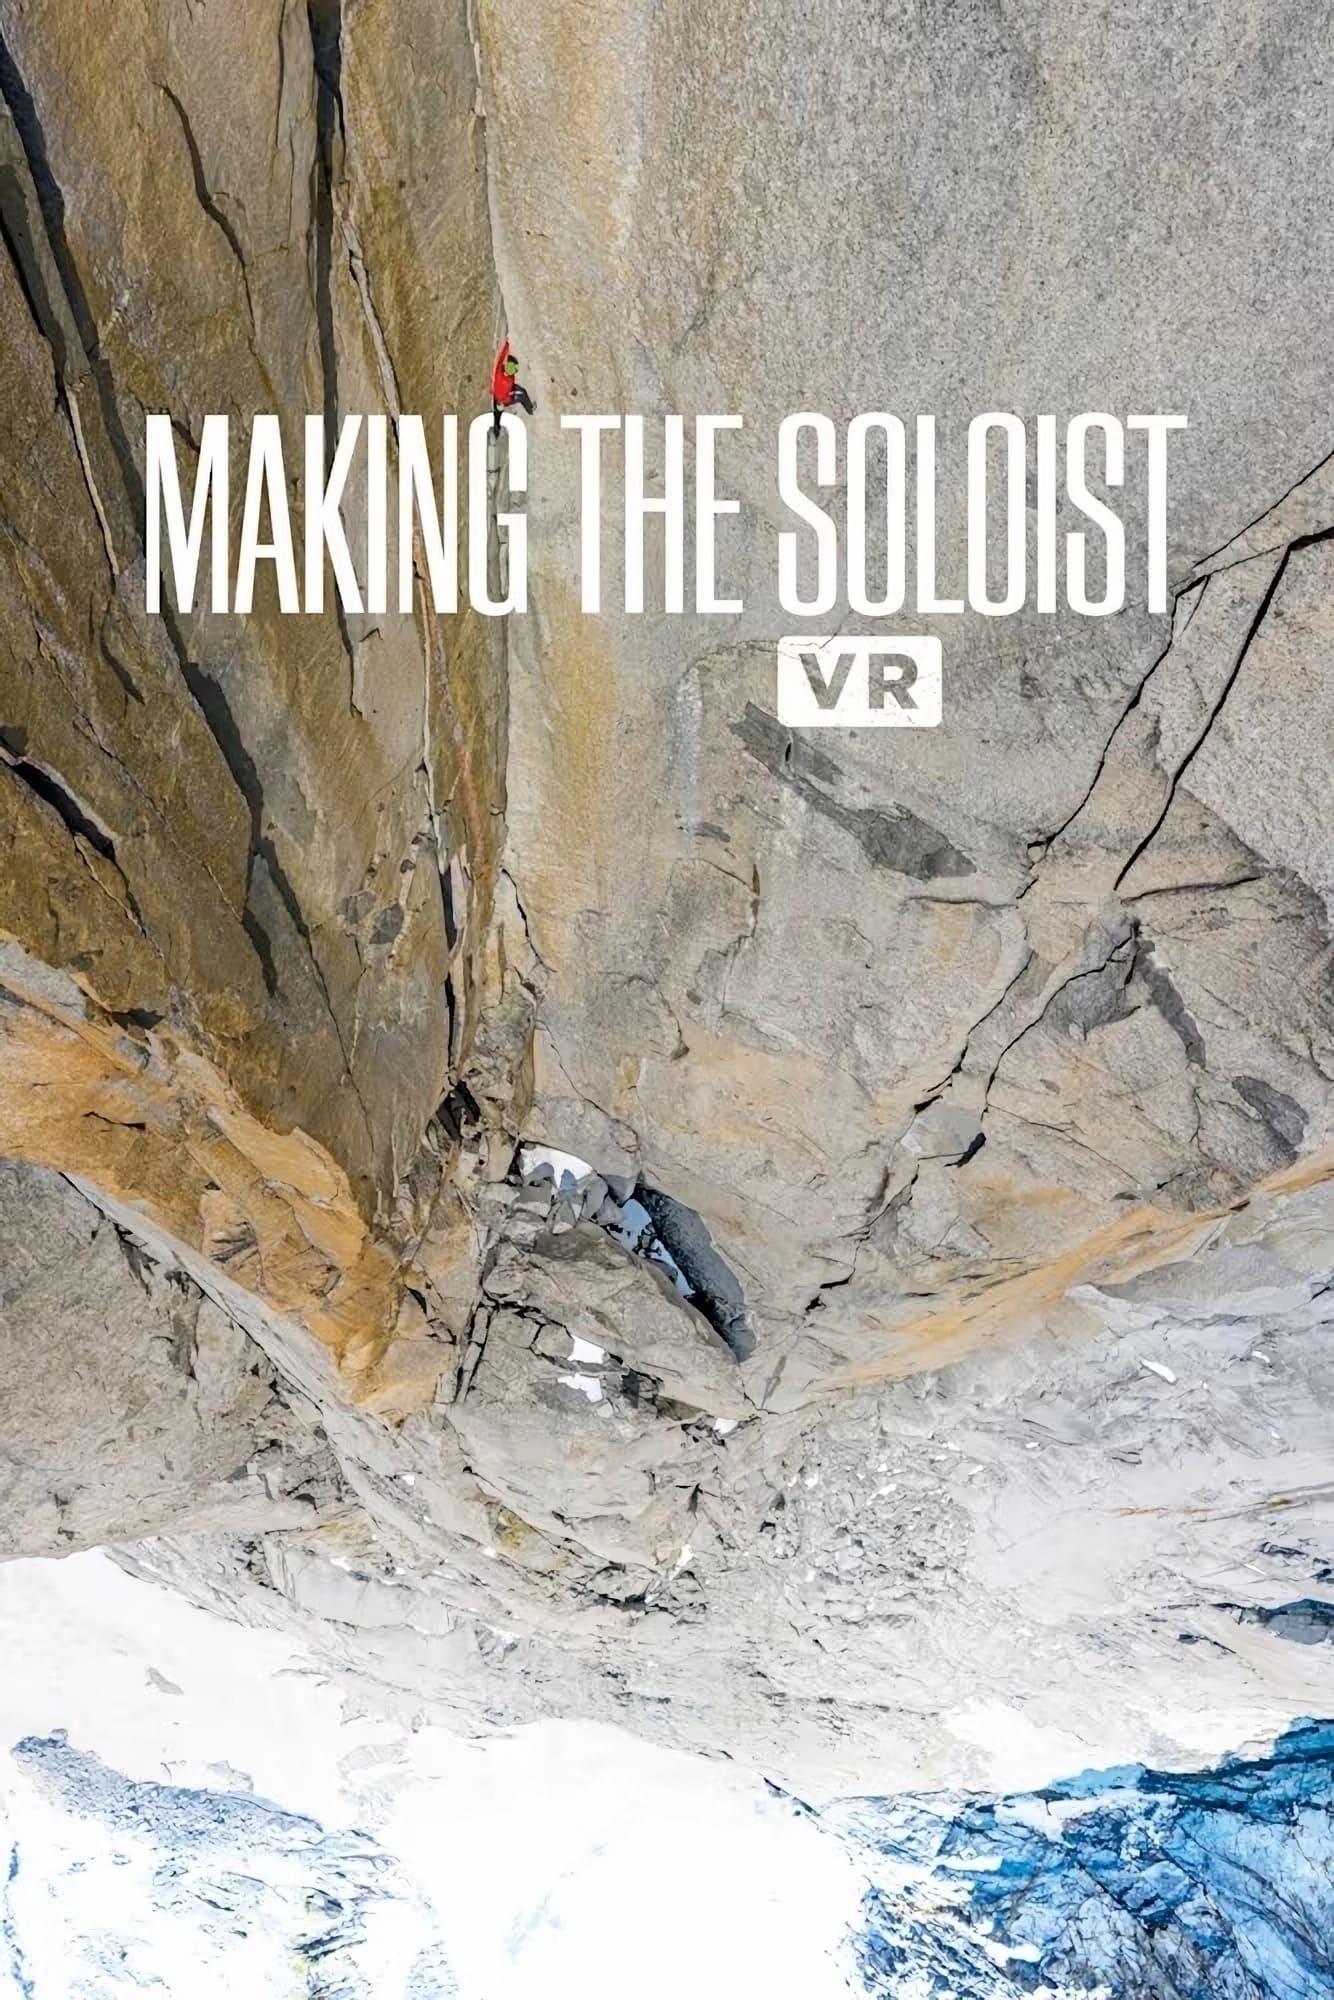 Making the Soloist VR